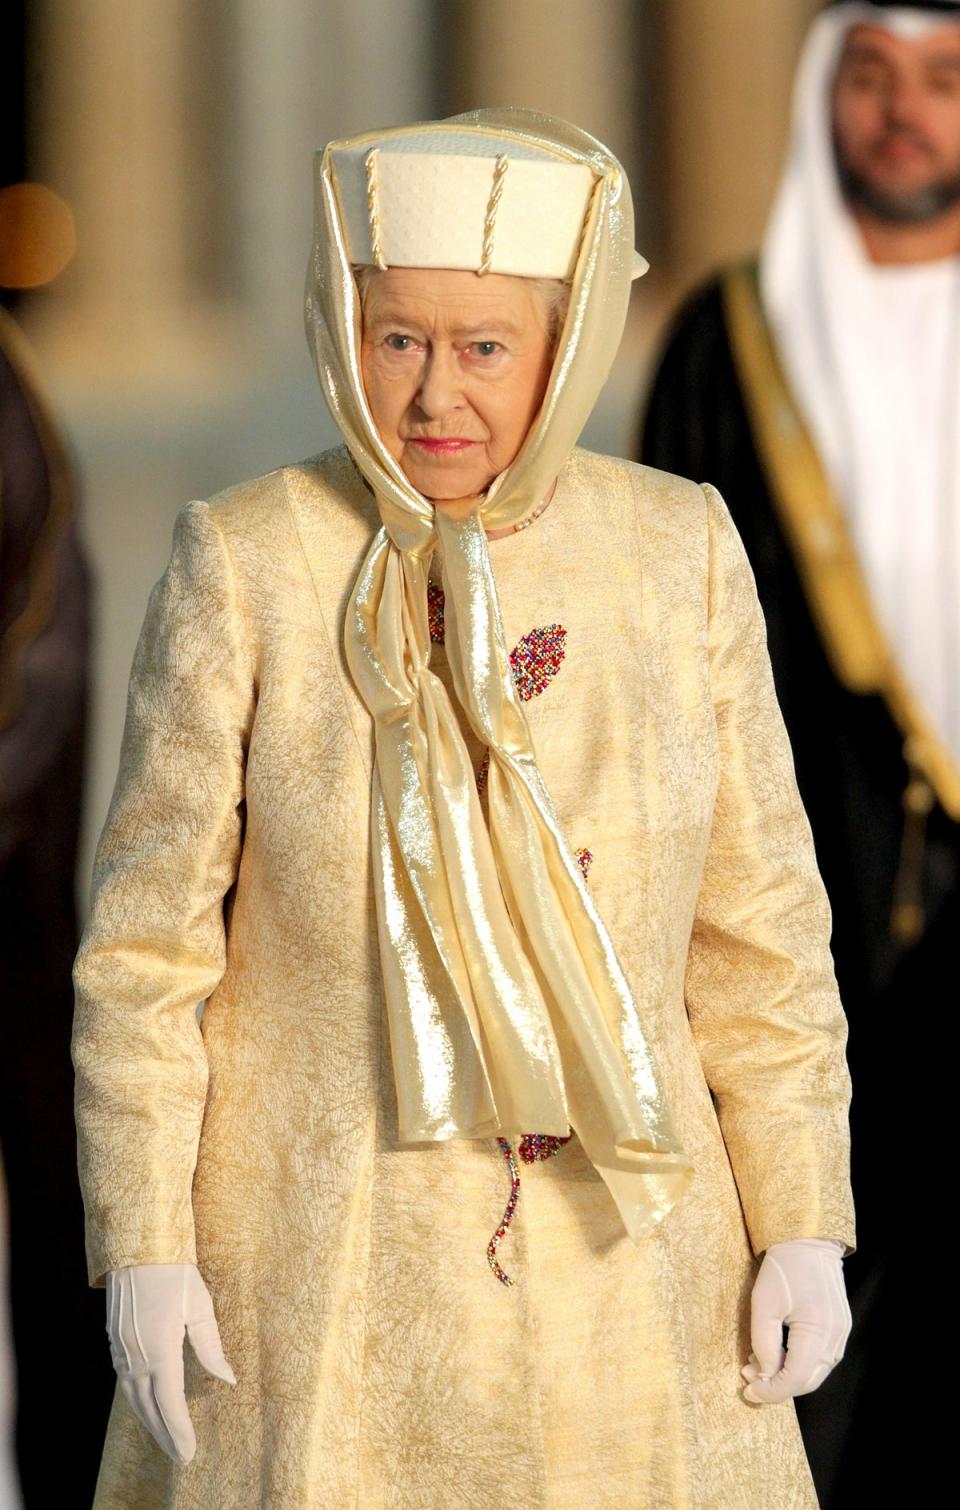 Queen Elizabeth II visiting the Sheikh Zayed Mosque in Abu Dhabi, United Arab Emirates, 2010 (Getty Images)